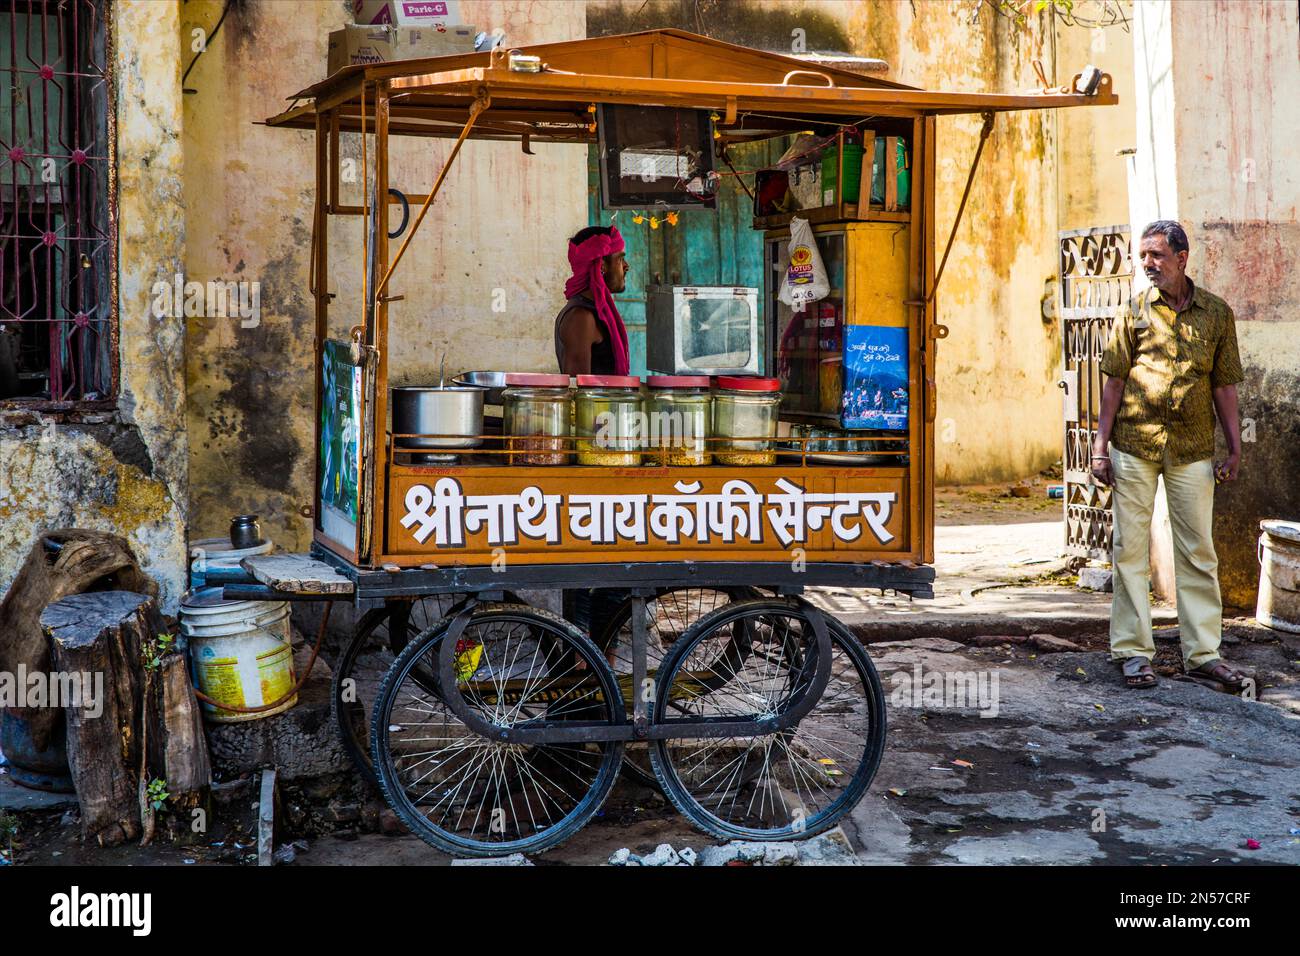 Food truck in the old town, Udaipur, Udaipur, Rajasthan, India Stock Photo